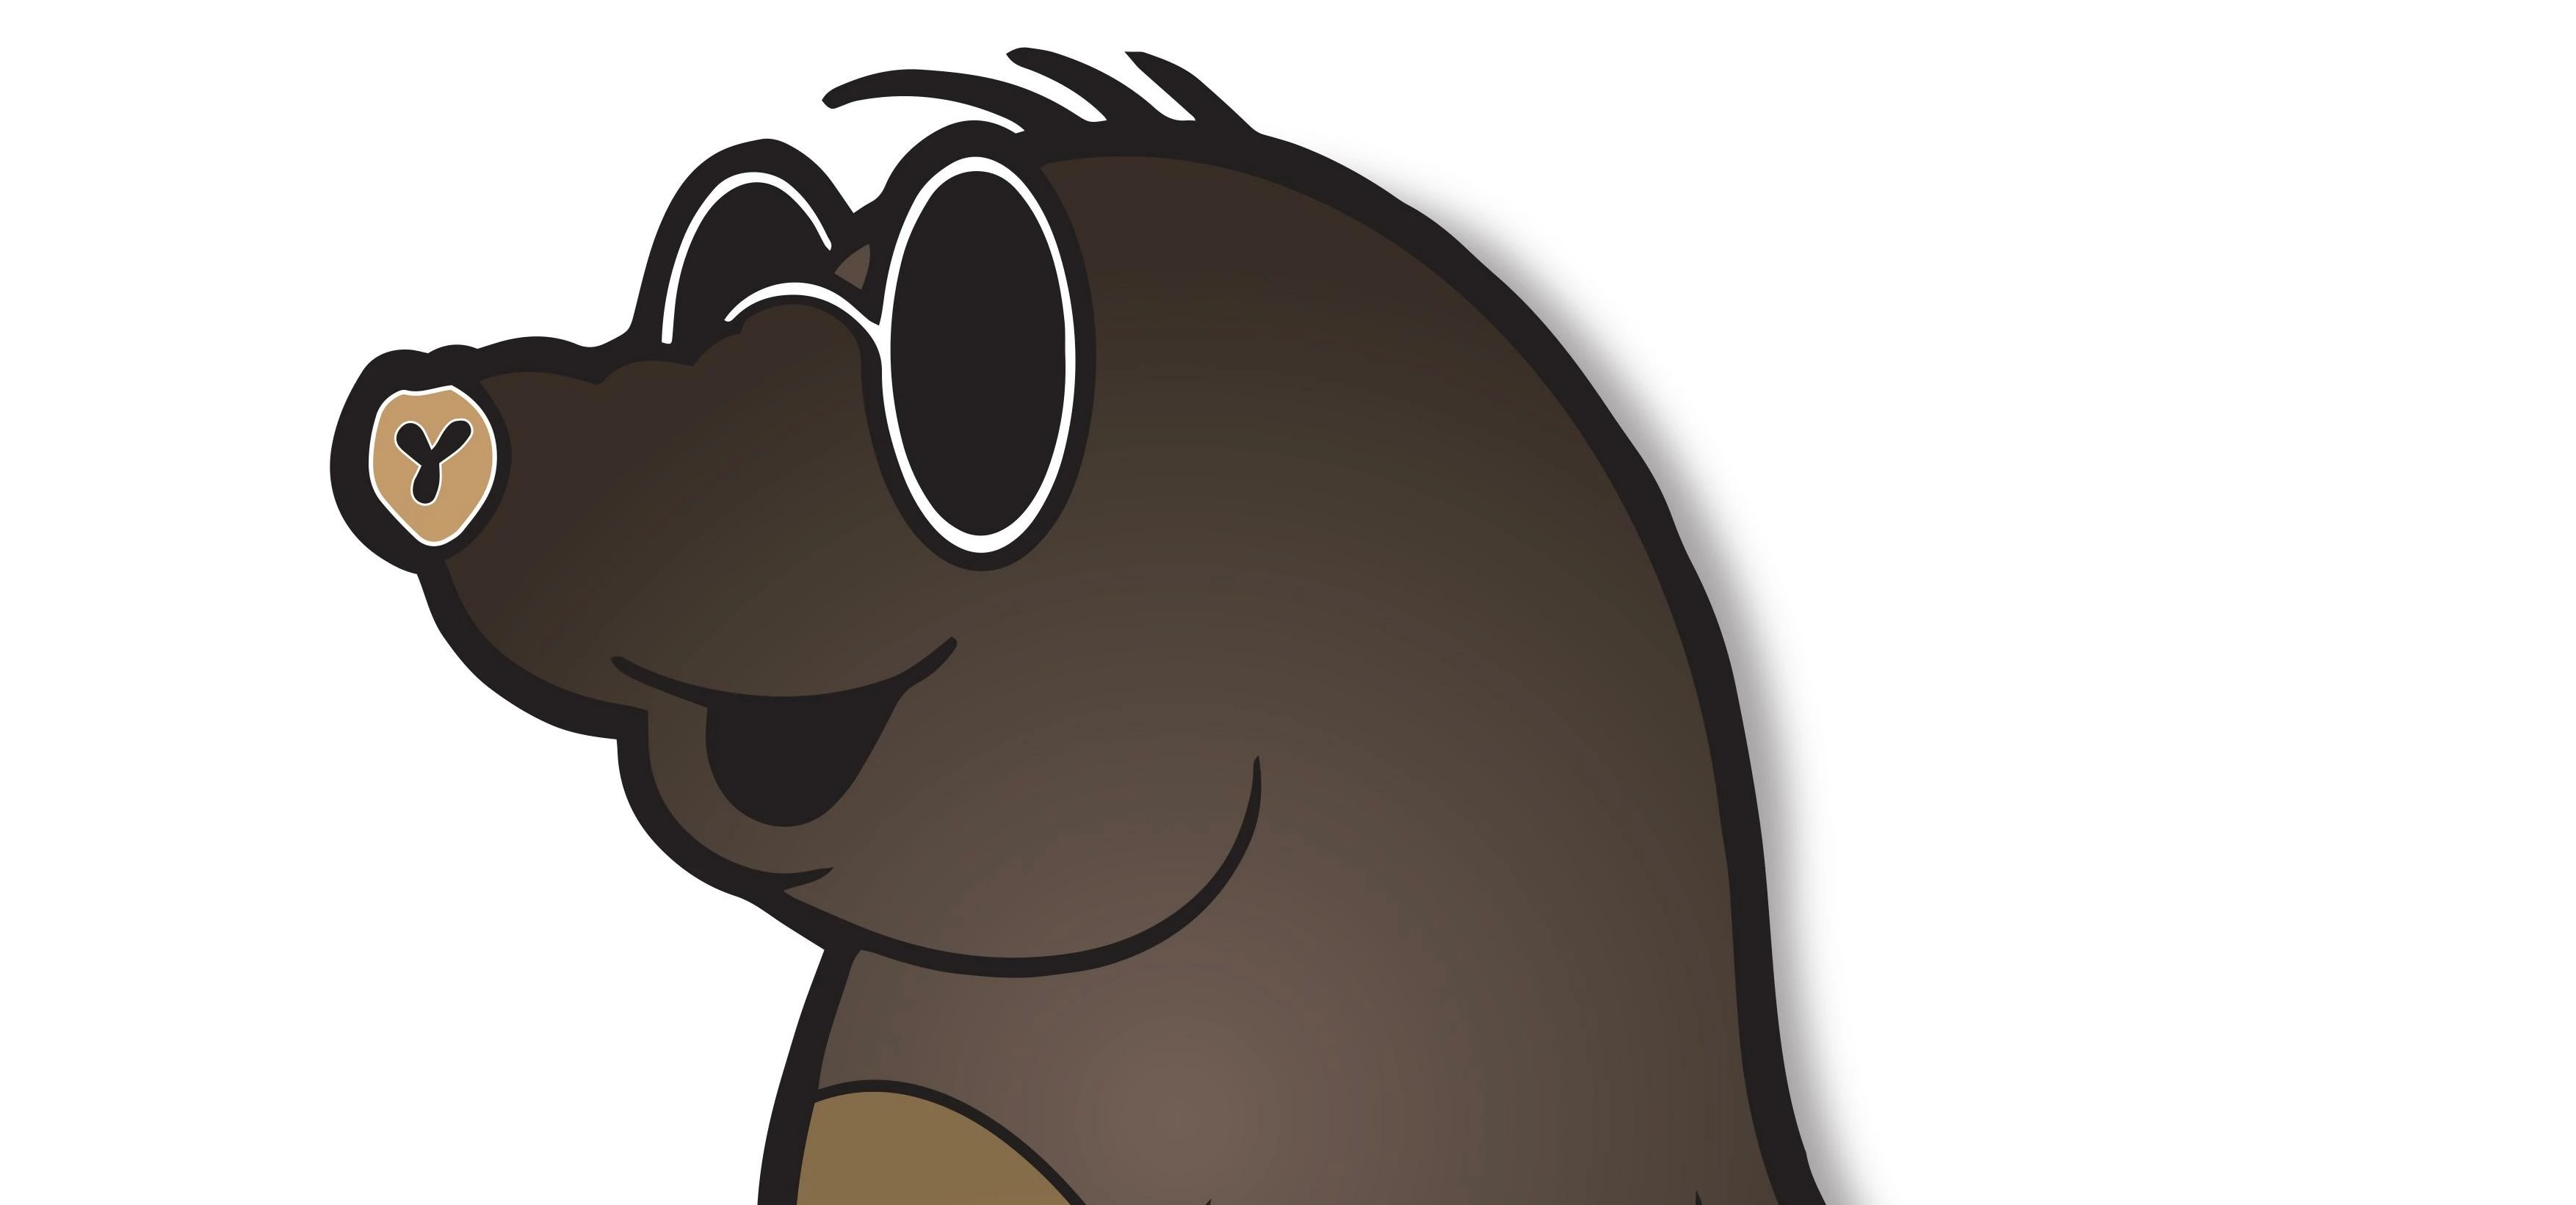 Ivan the mole fronts the revolutionary new Ivan_intro app, which generates business leads 24-7, 365 